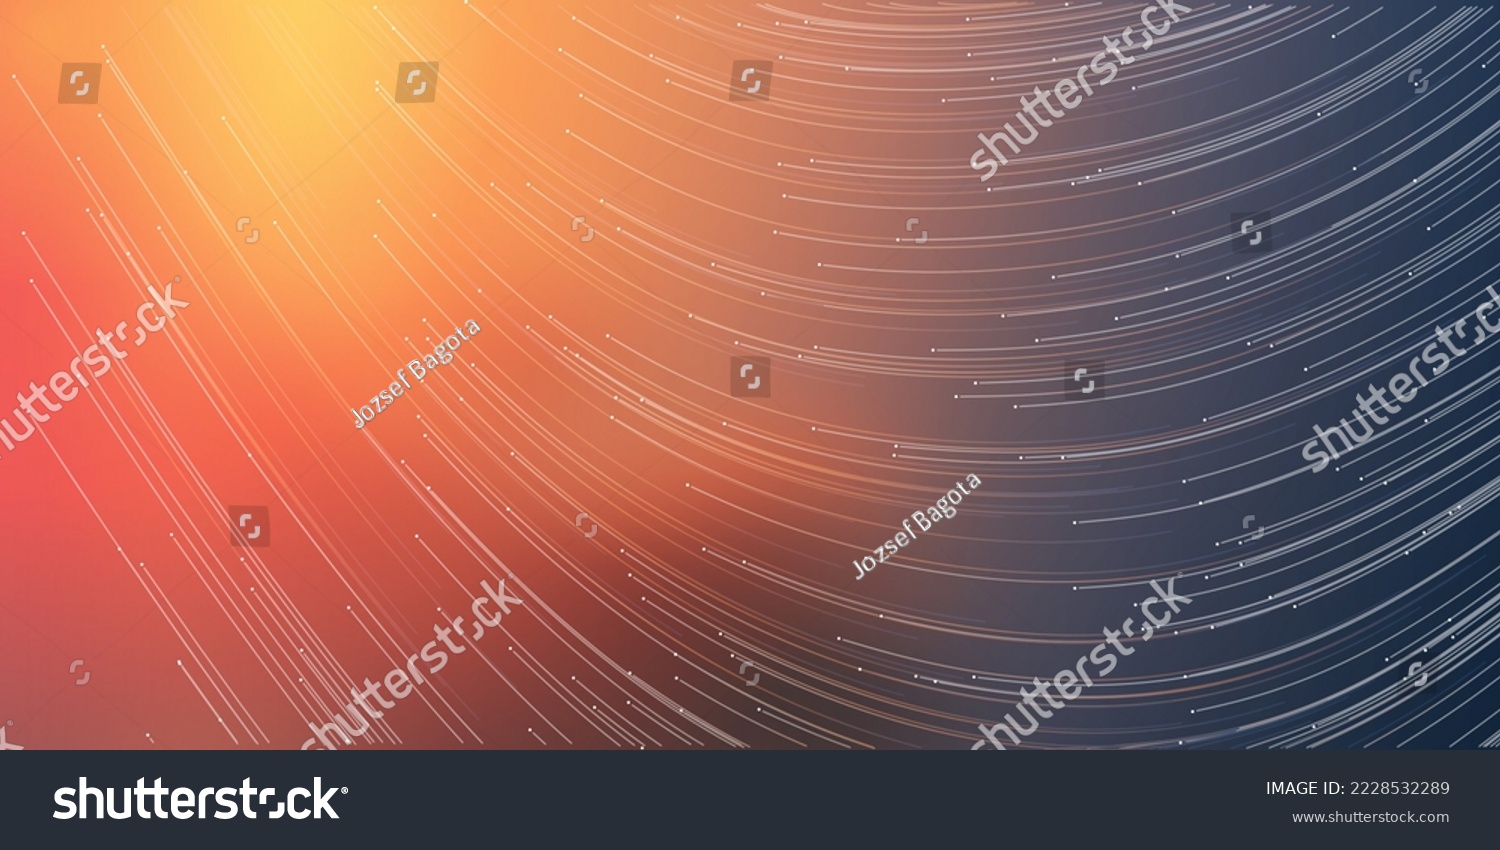 SVG of Flowing Current, Energy Lines Pattern in Glowing Sunlit Space and Starry Sky Around - Modern Style Futuristic Technology or Astronomy Concept Background,Generative Art, Creative Template,Vector Design svg